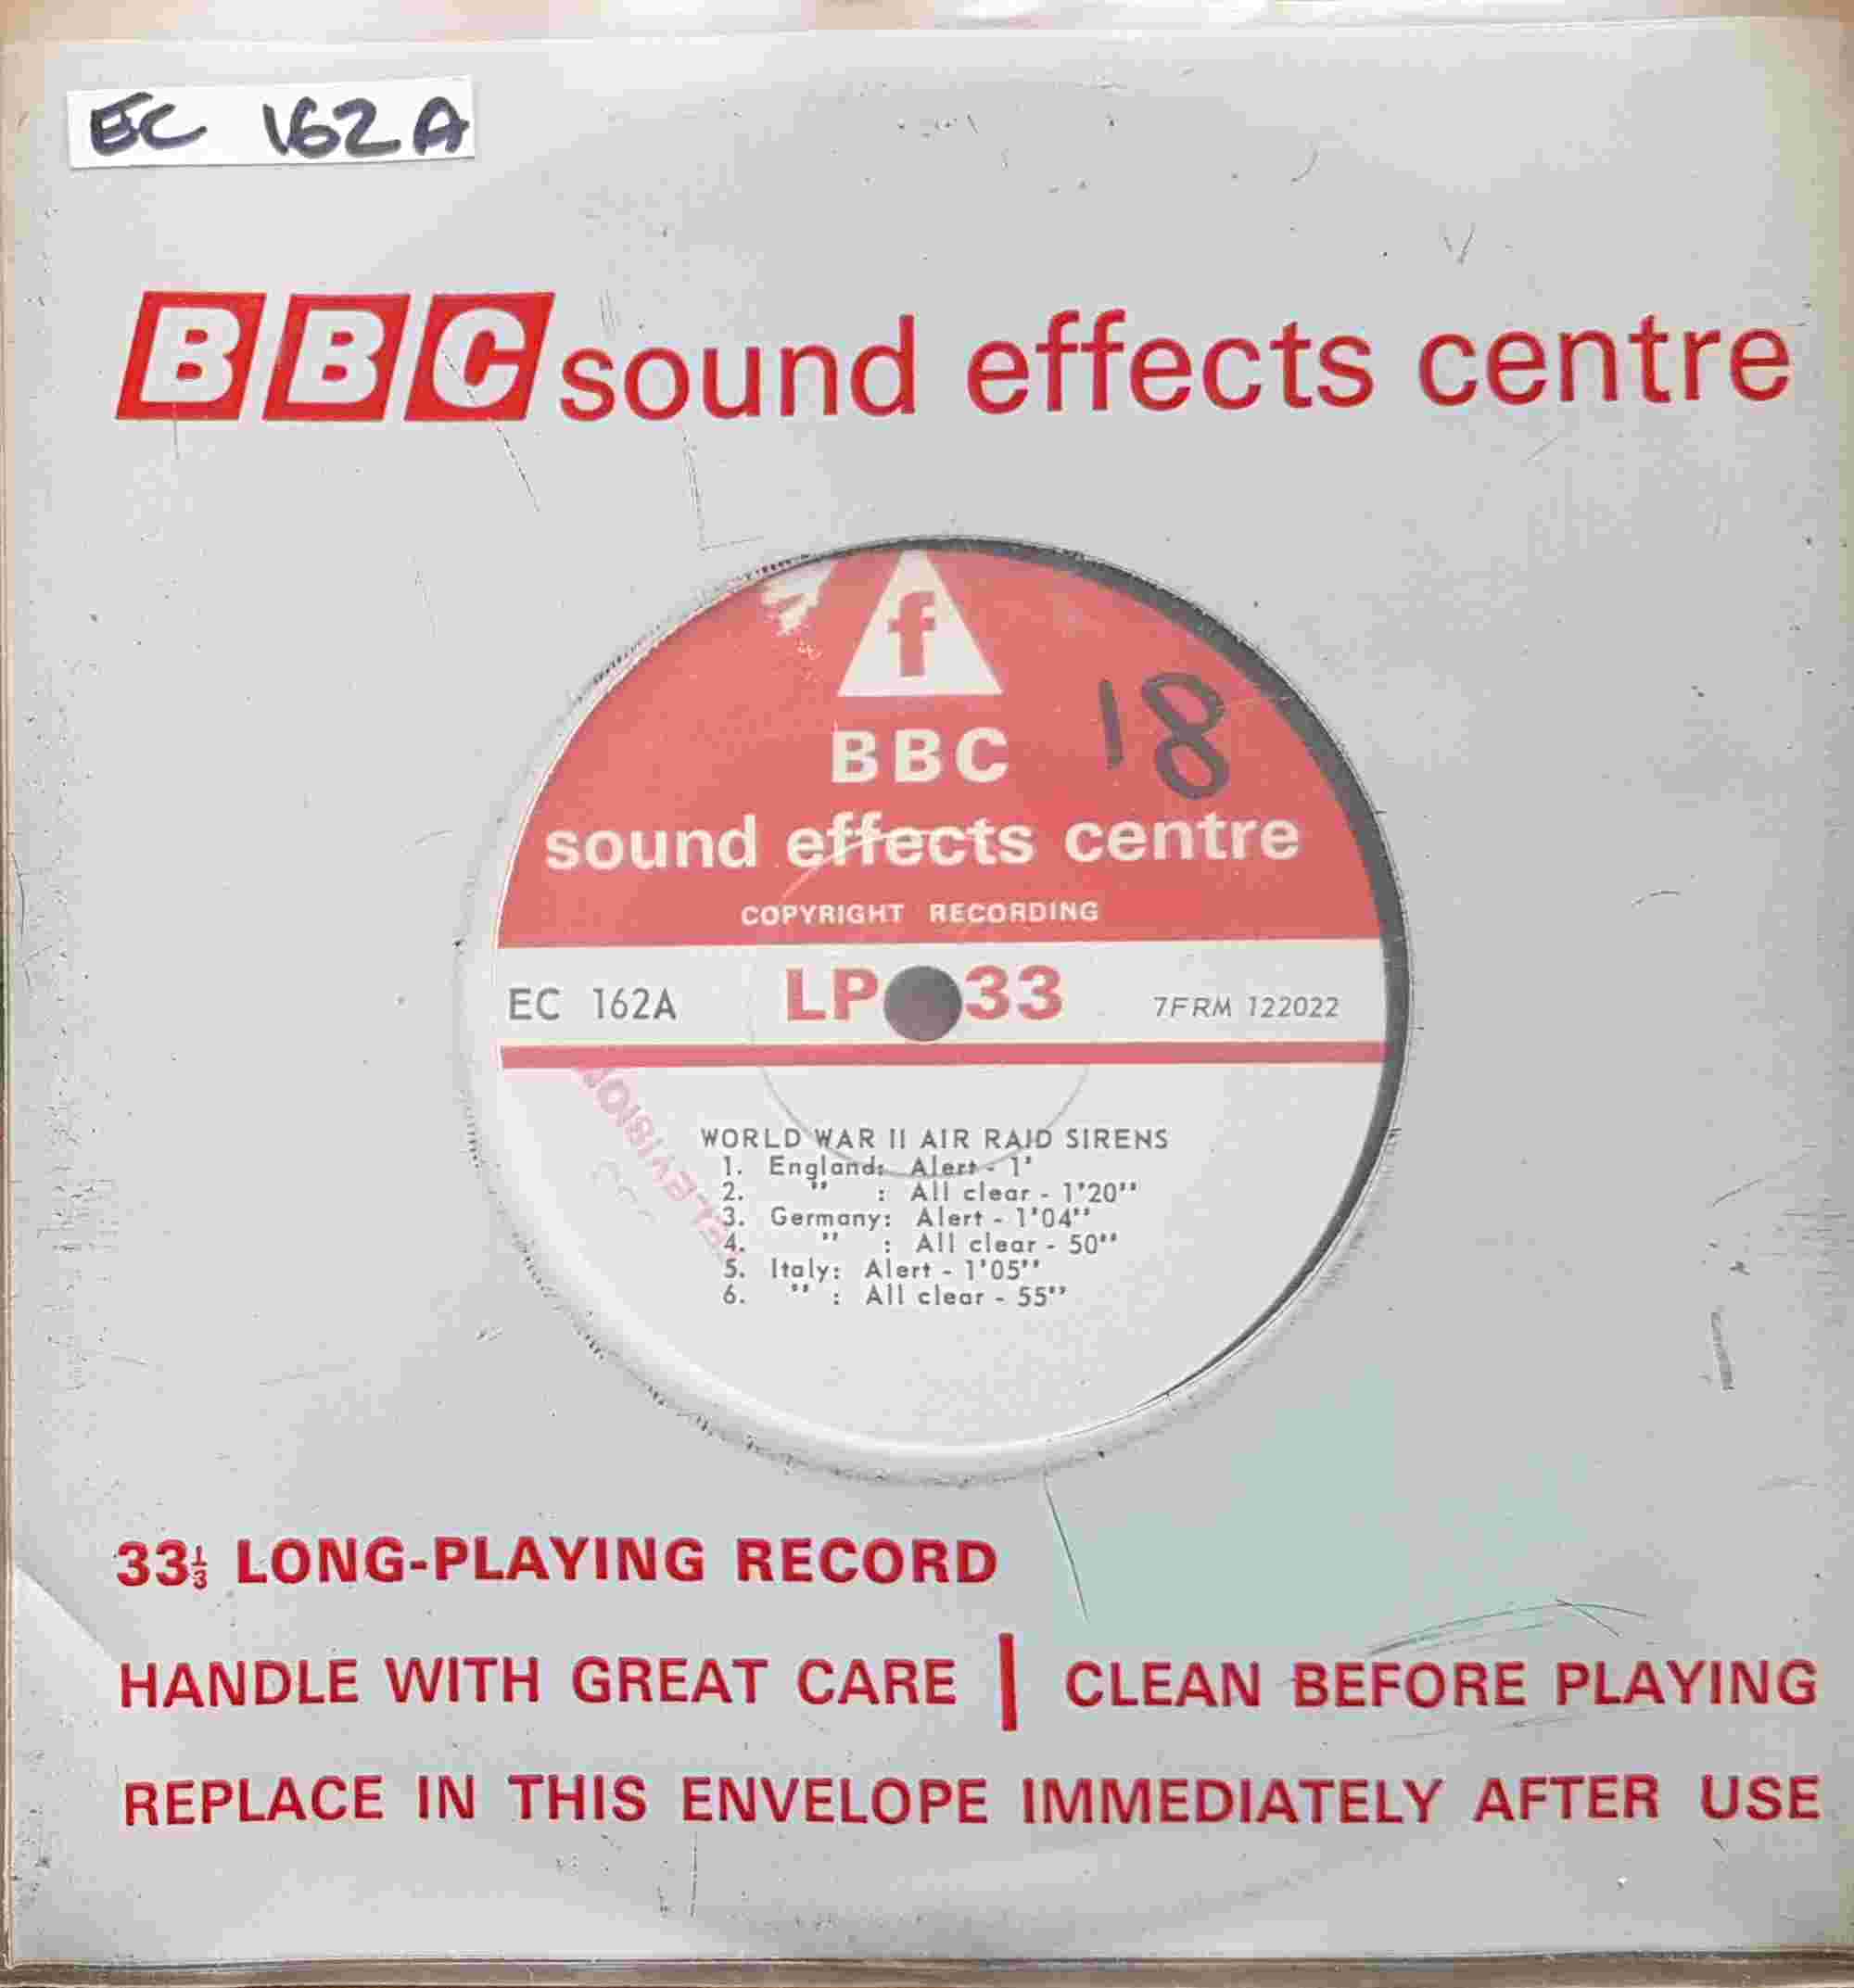 Picture of EC 162A World War II - Air raid sirens / Sirens & gunfire by artist Not registered from the BBC records and Tapes library